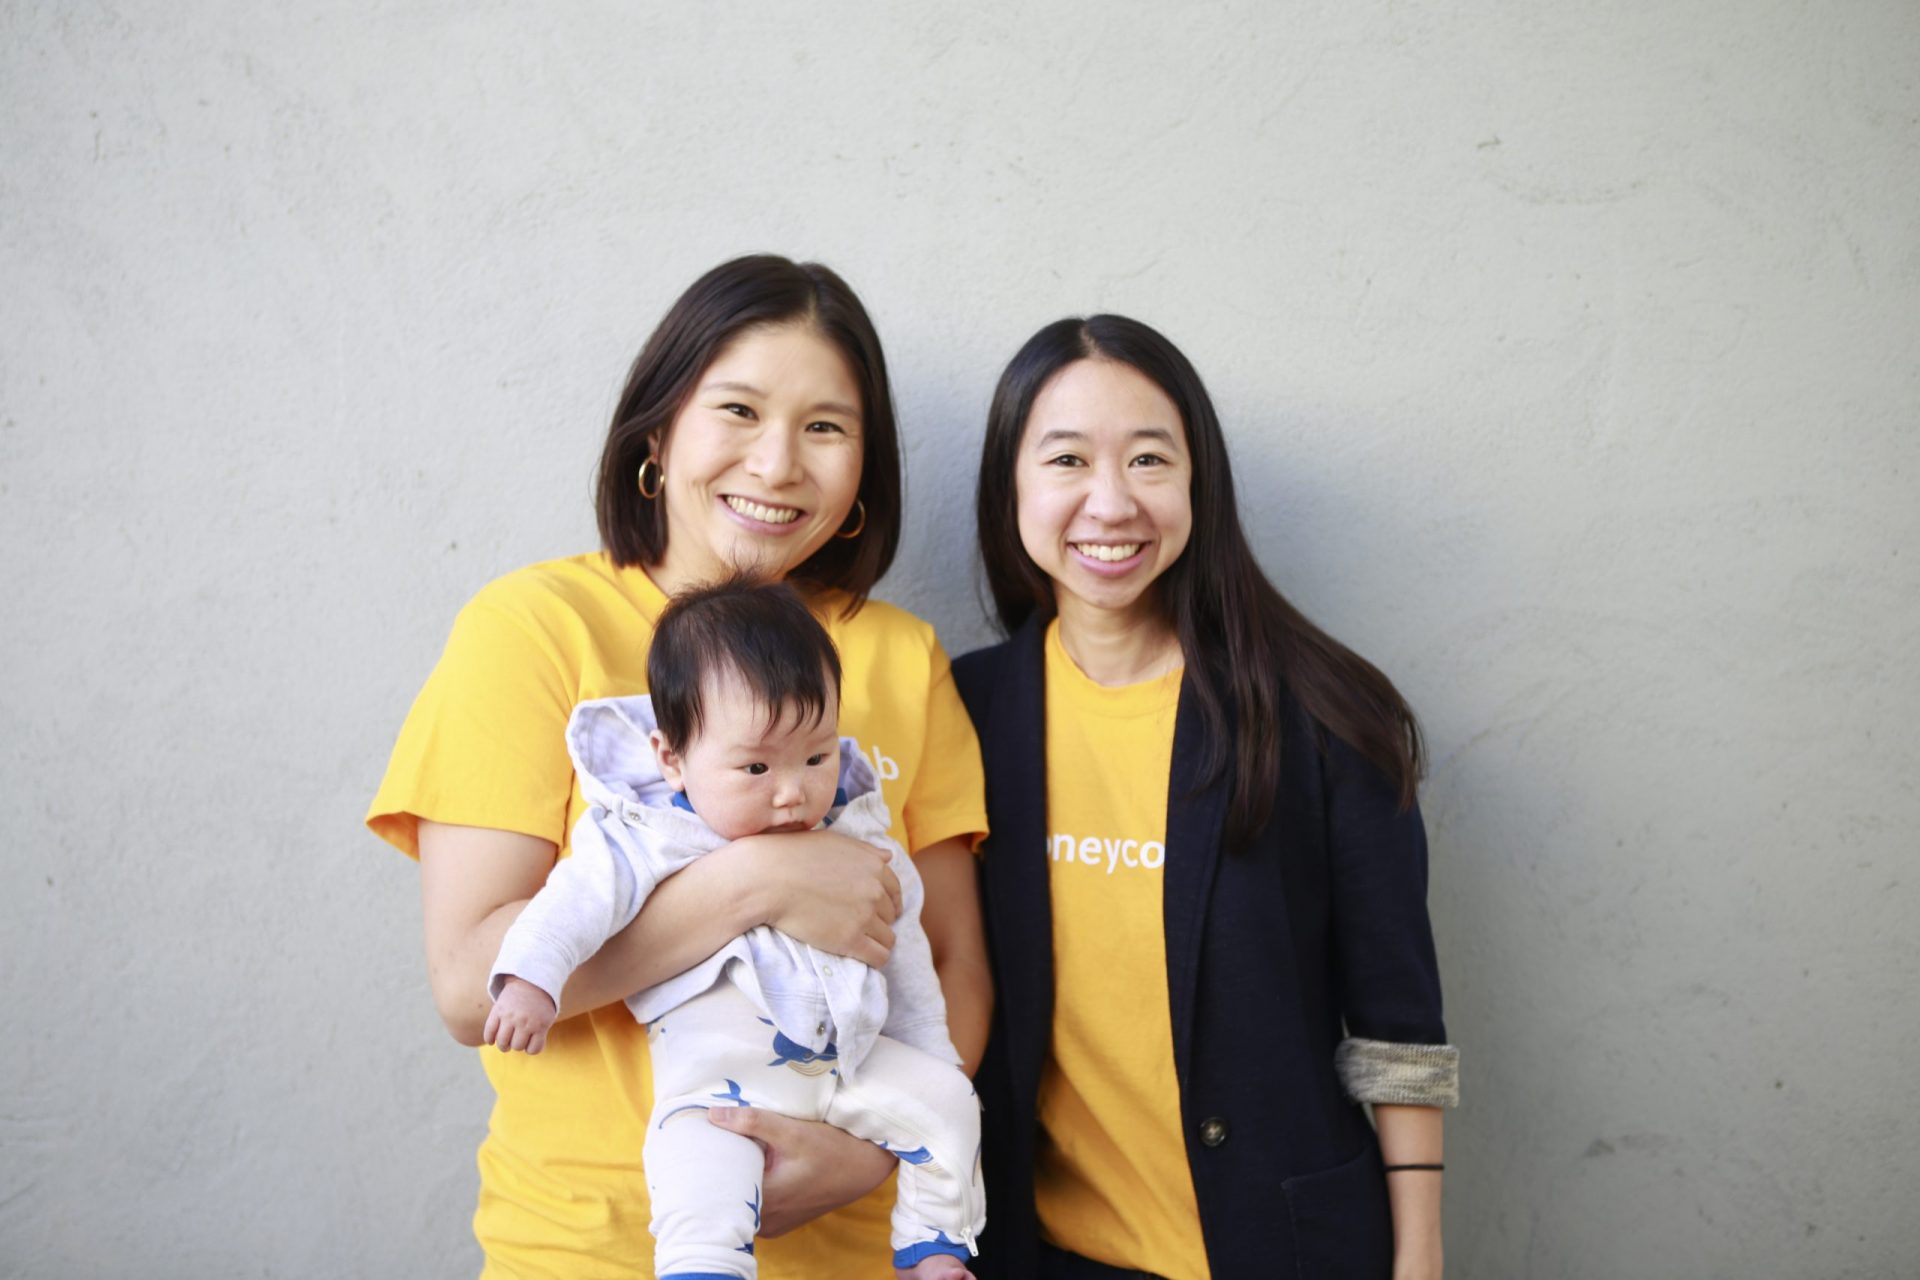 honeycomb,-a-private-social-app-for-families,-raises-$4m-seed-round